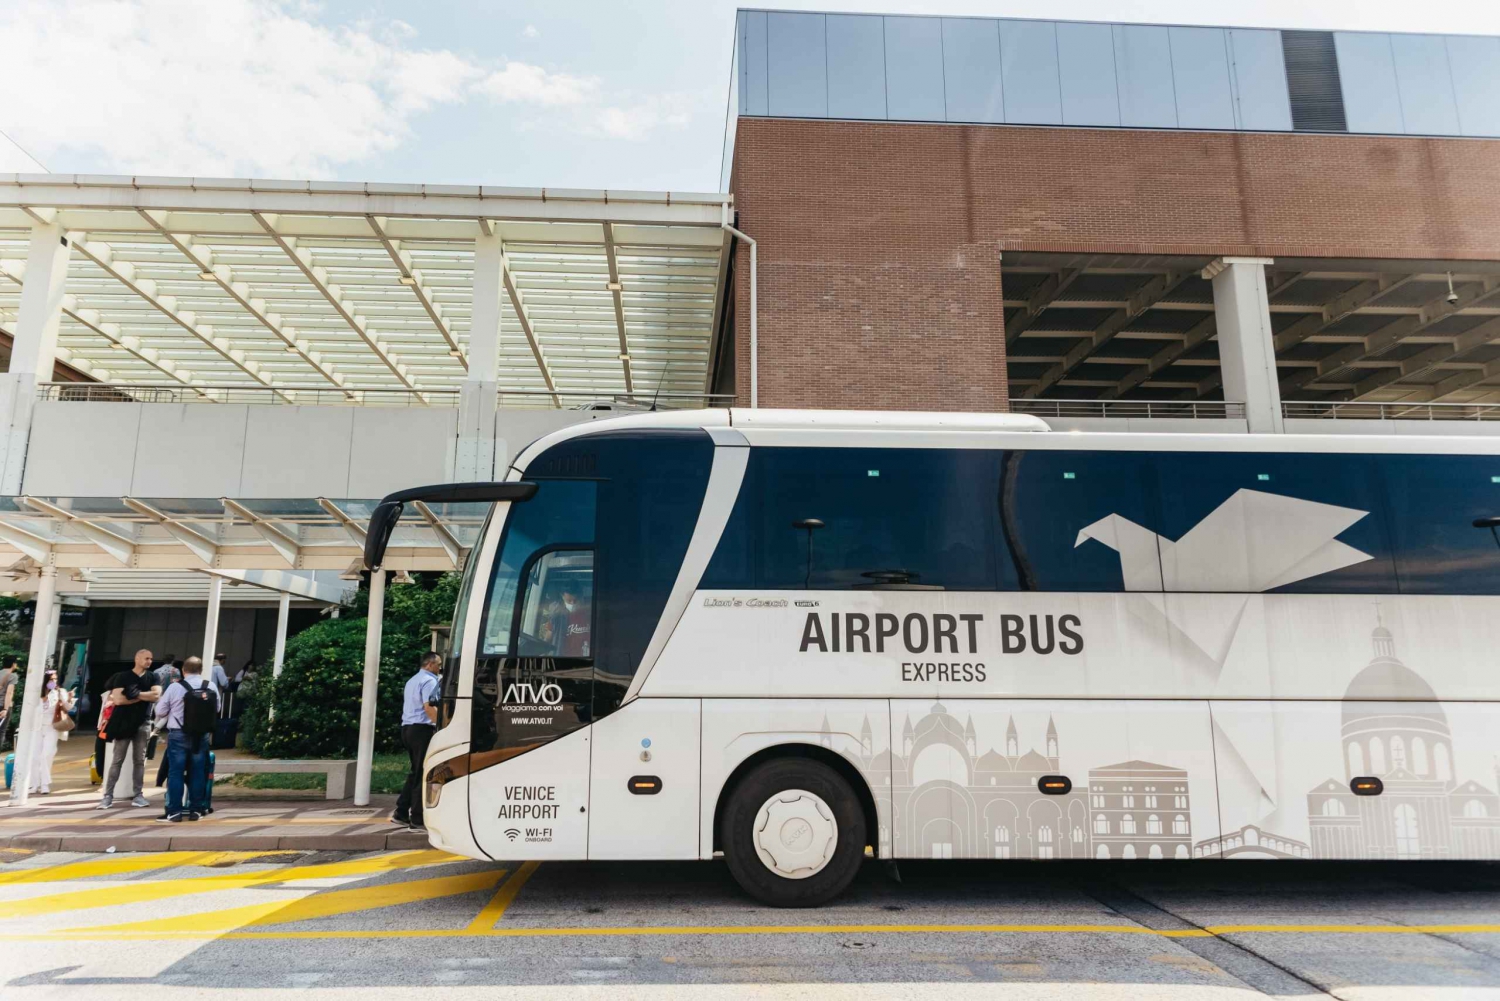 Venice: Bus Transfer between Marco Polo Airport and City